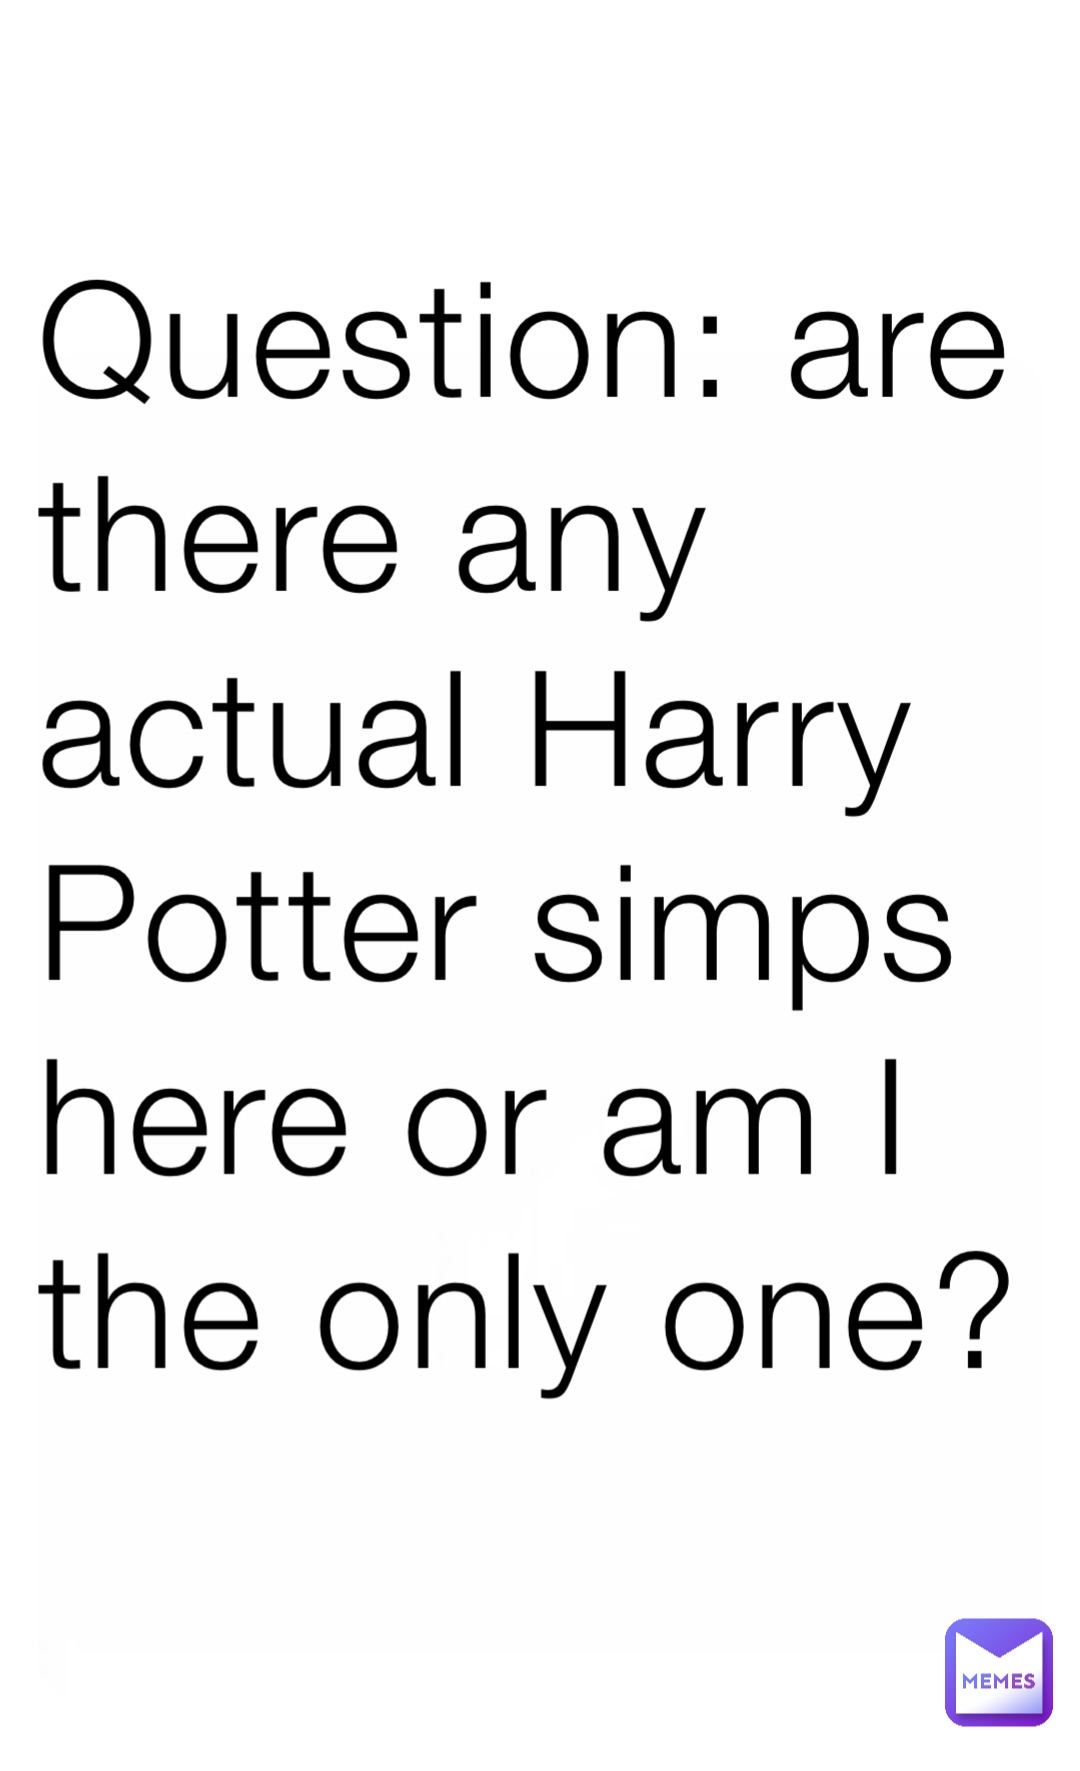 Question: are there any actual Harry Potter simps here or am I the only one?